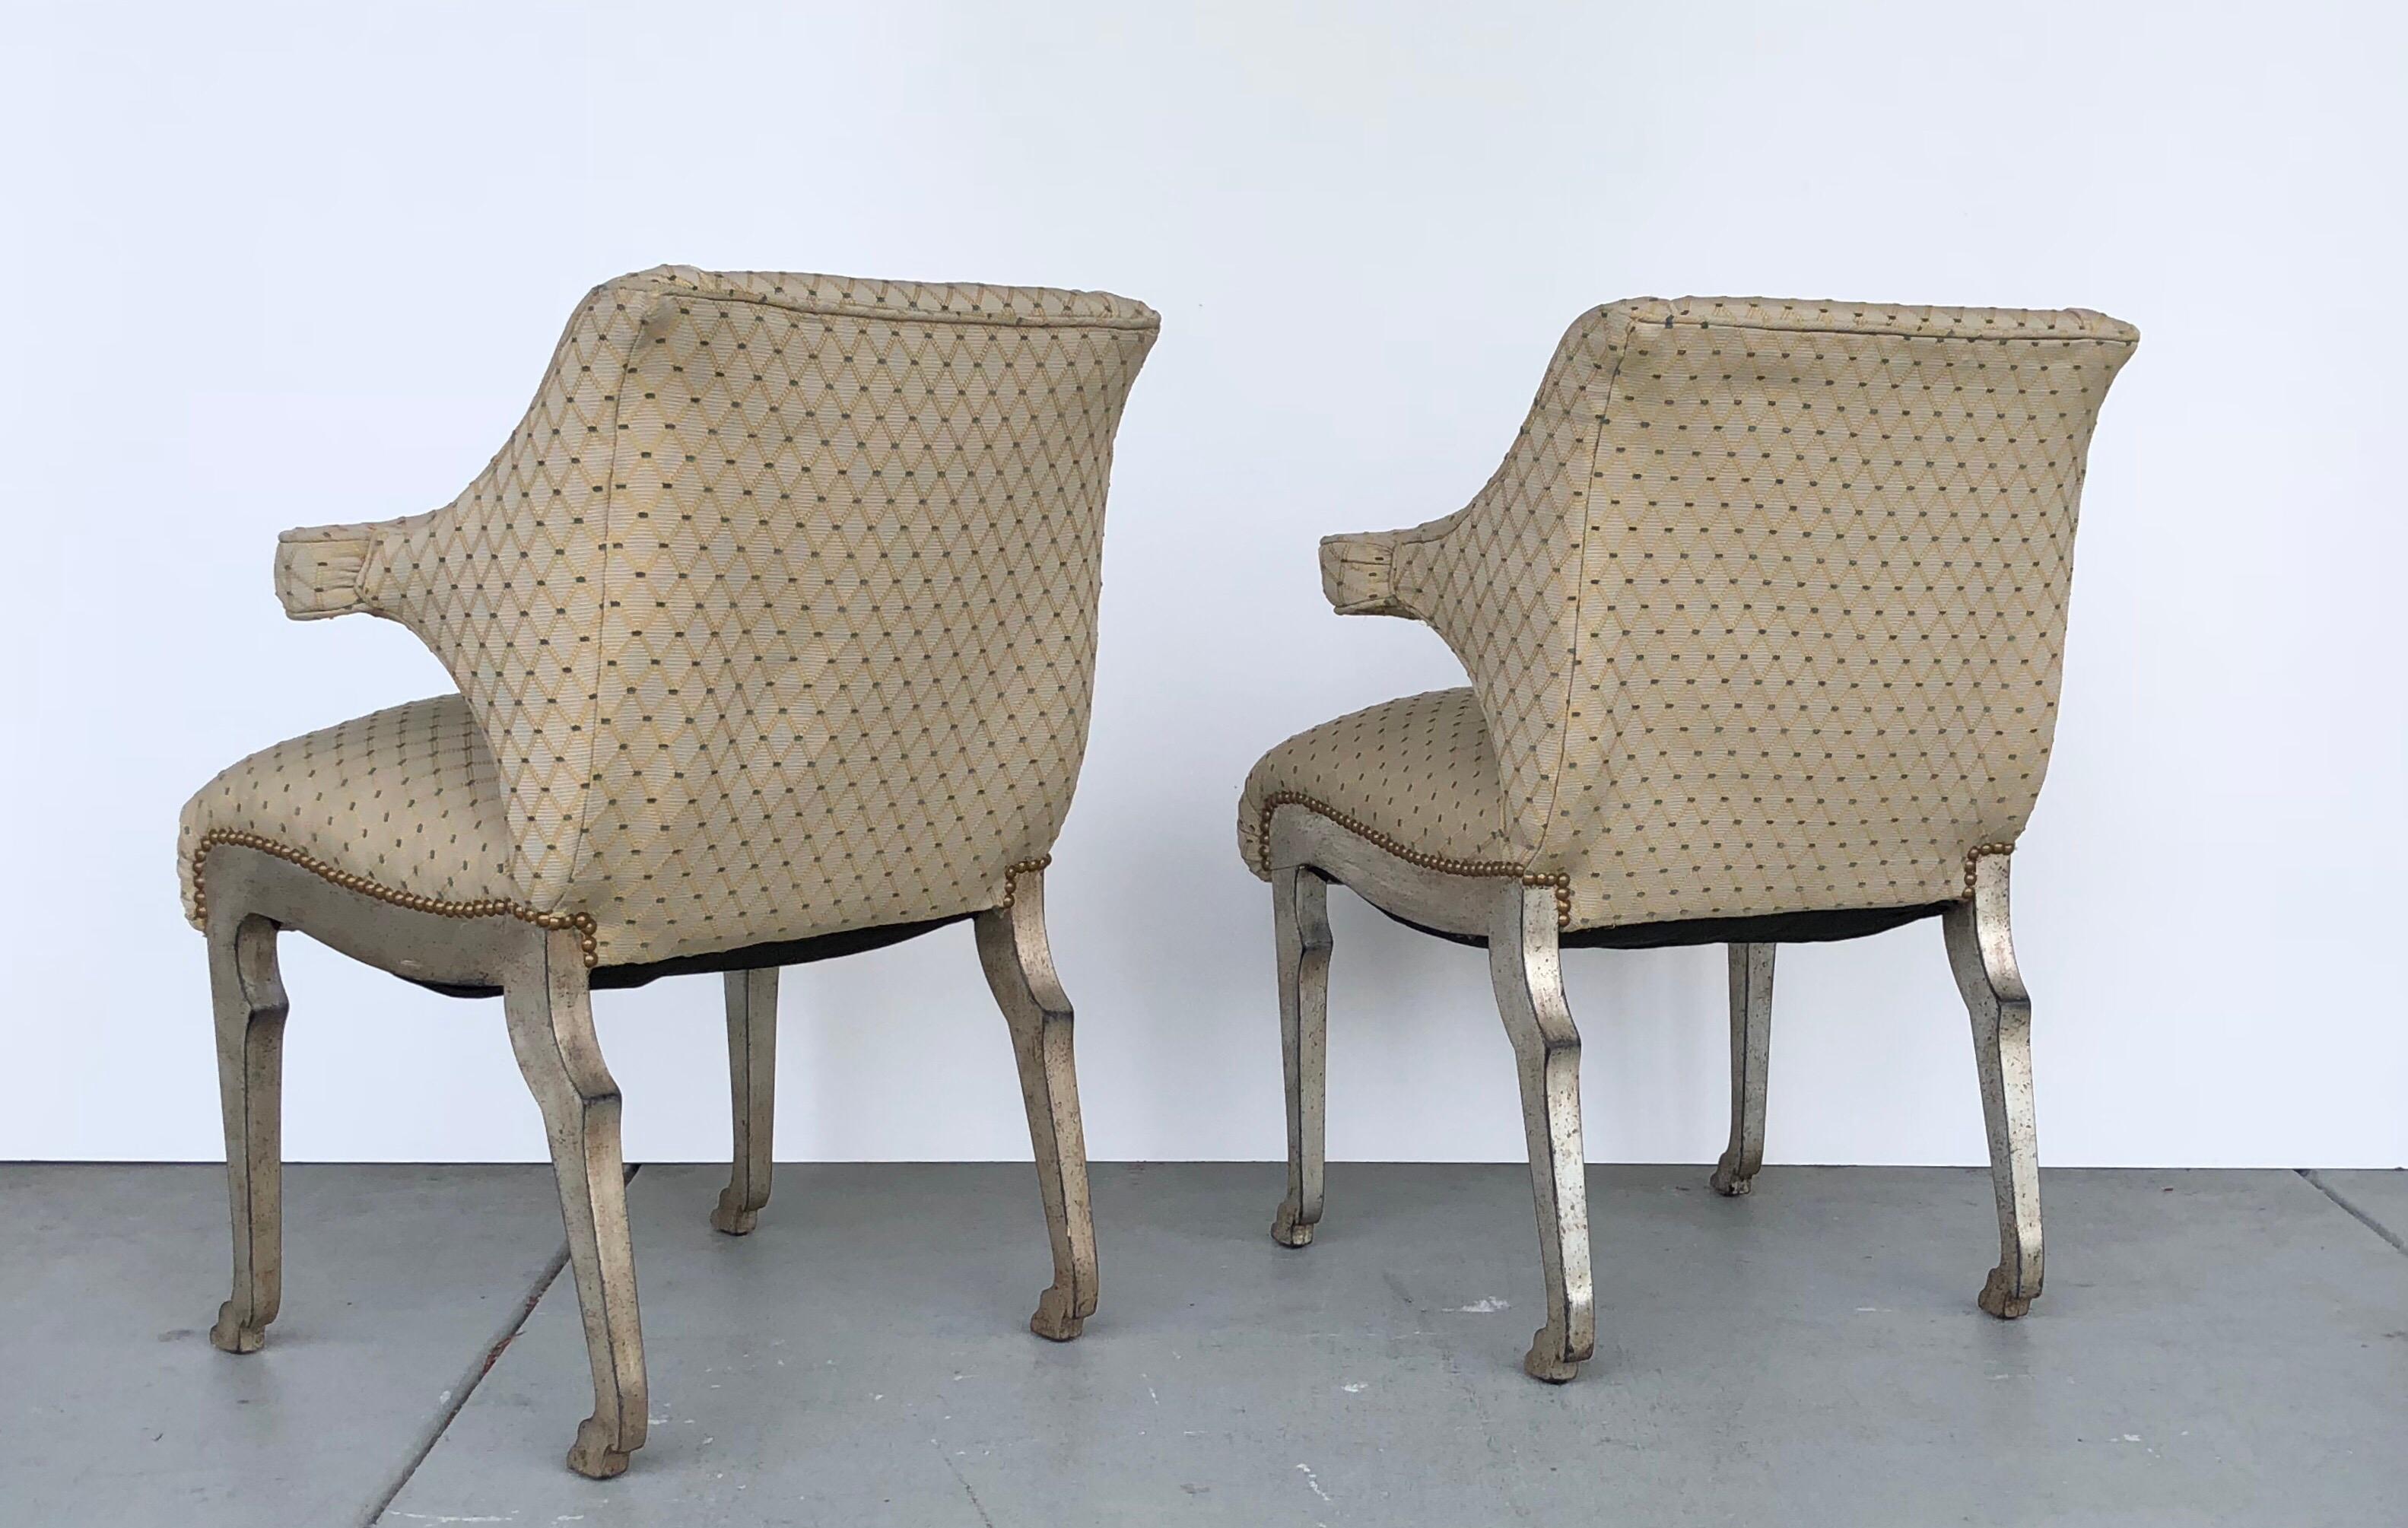 A pair of midcentury chairs with wonderful animal legs. The wood legs are finished in silver gilt. The seats are upholstered. Great design that is stunning from every angle.